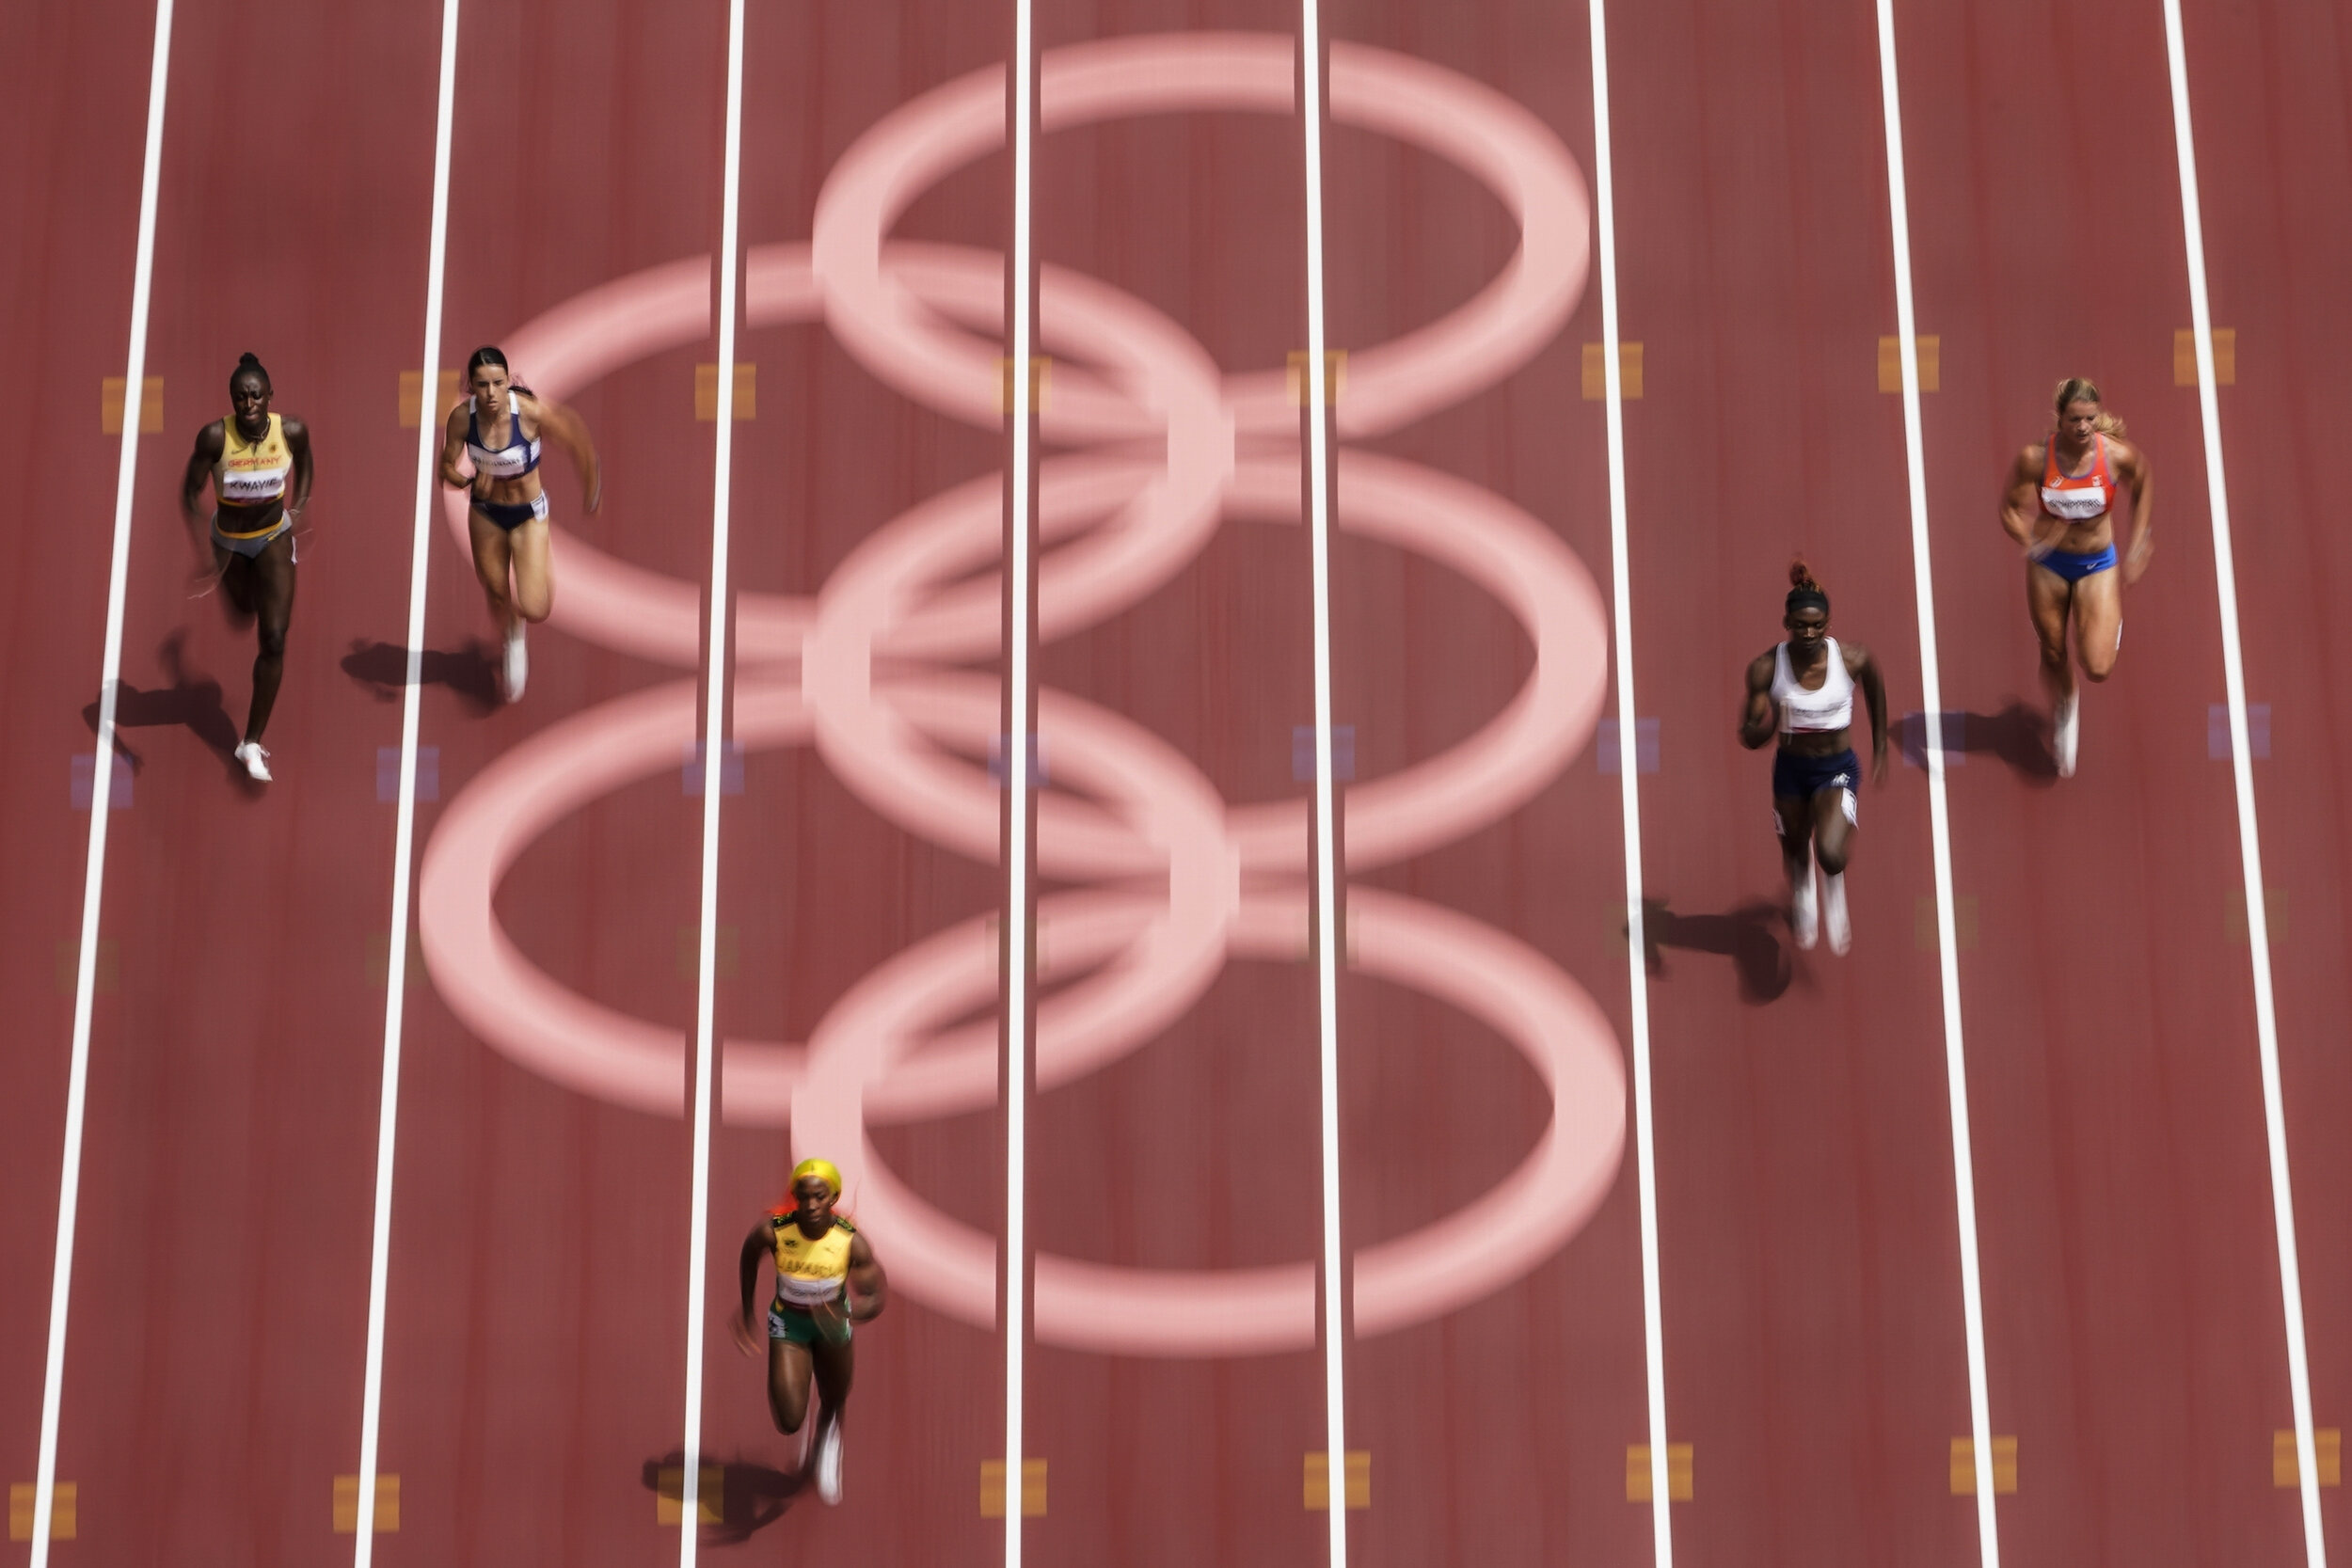  Shelly-Ann Fraser-Pryce, of Jamaica, wins her heat during the semifinals in the women's 200-meter at the 2020 Summer Olympics, Monday, Aug. 2, 2021, in Tokyo. (AP Photo/Morry Gash) 